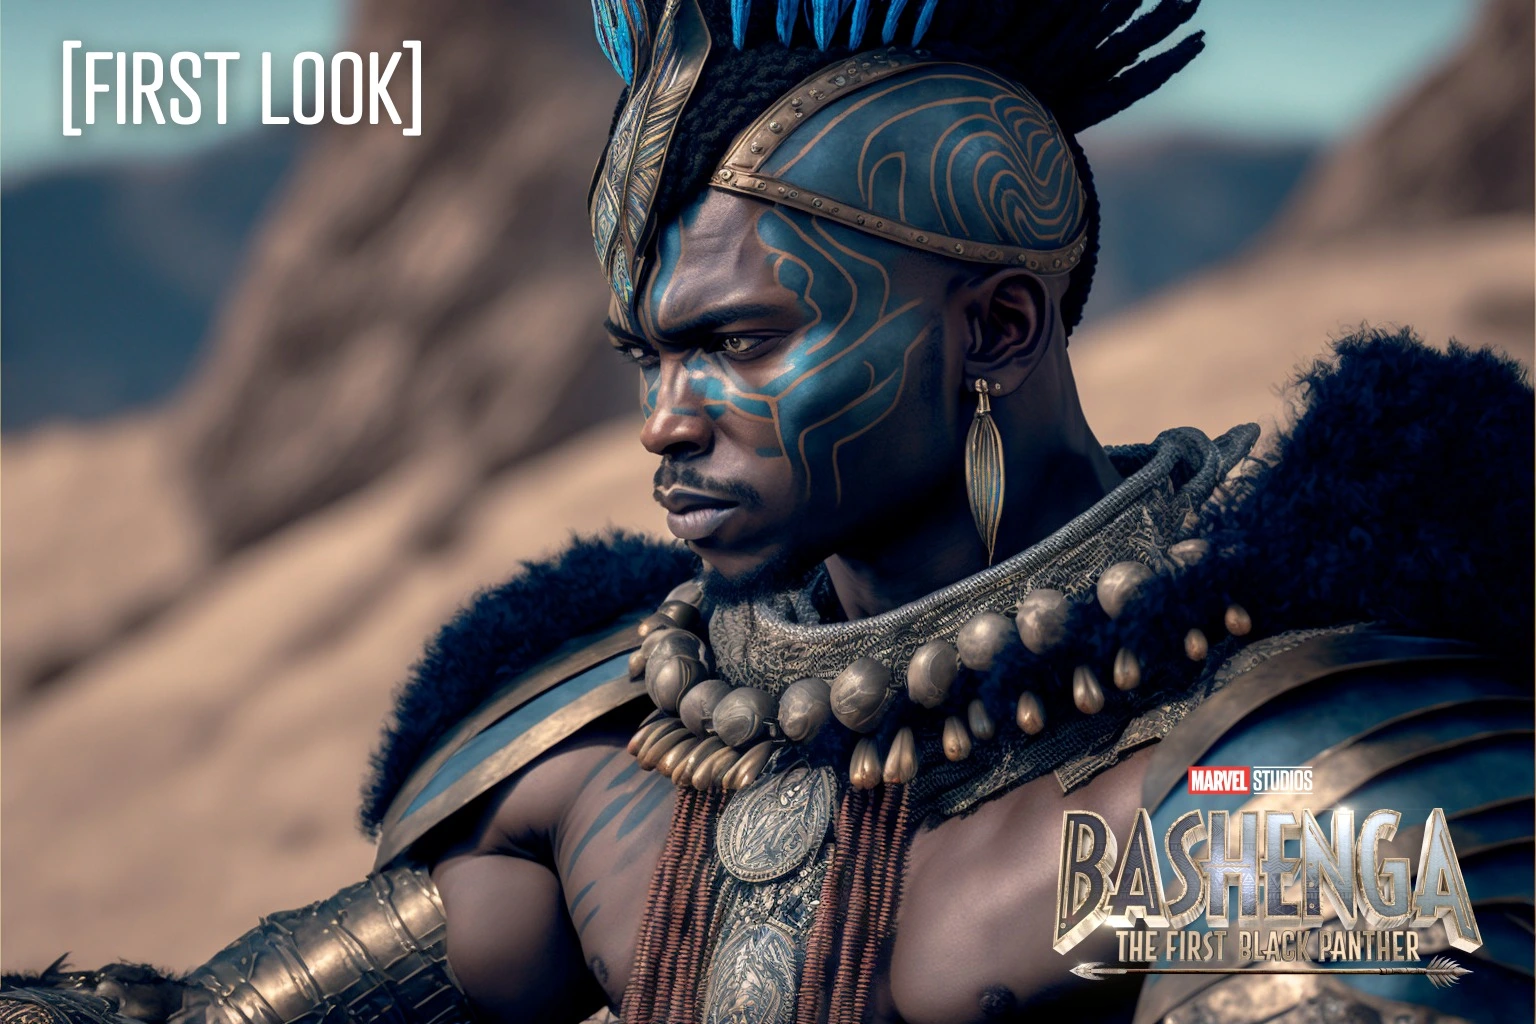 bashenga the first black panther first look wallpaper